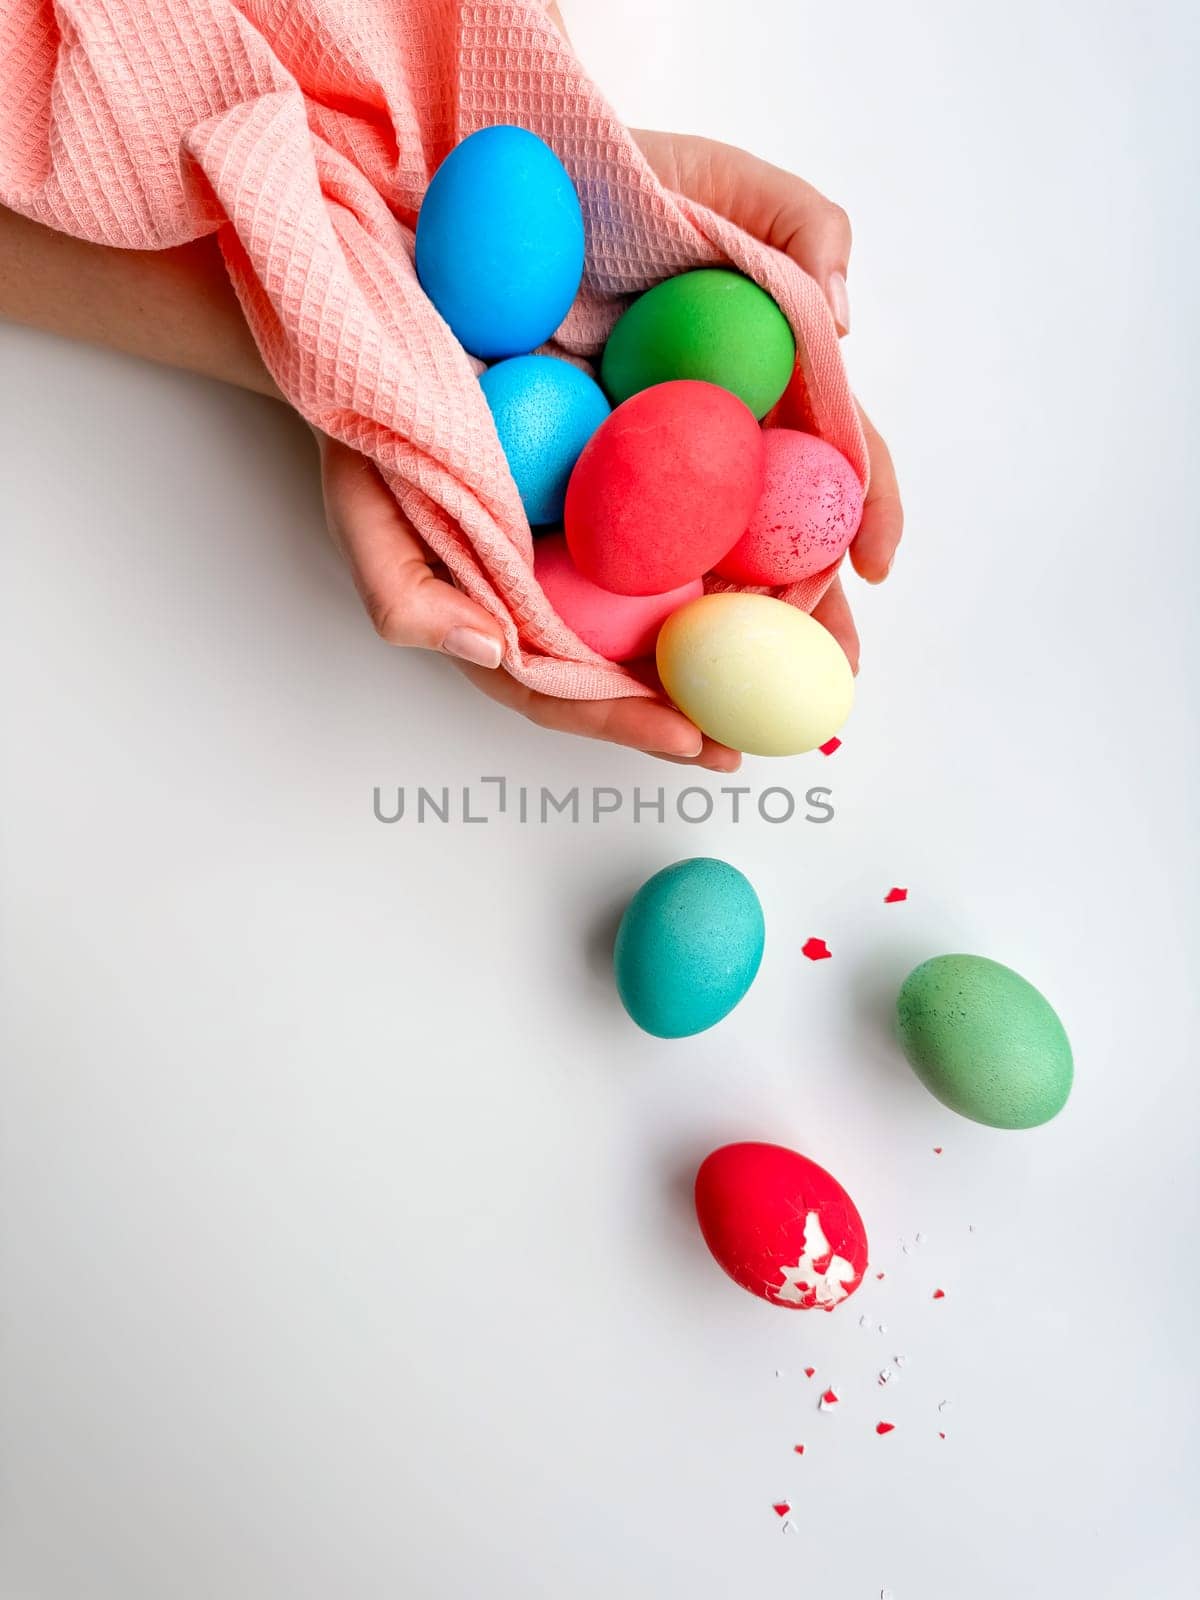 Hands holding colorful painted Easter eggs with one cracked egg on the side, representing Easter festivities, spring celebrations, and family fun activities. High quality photo